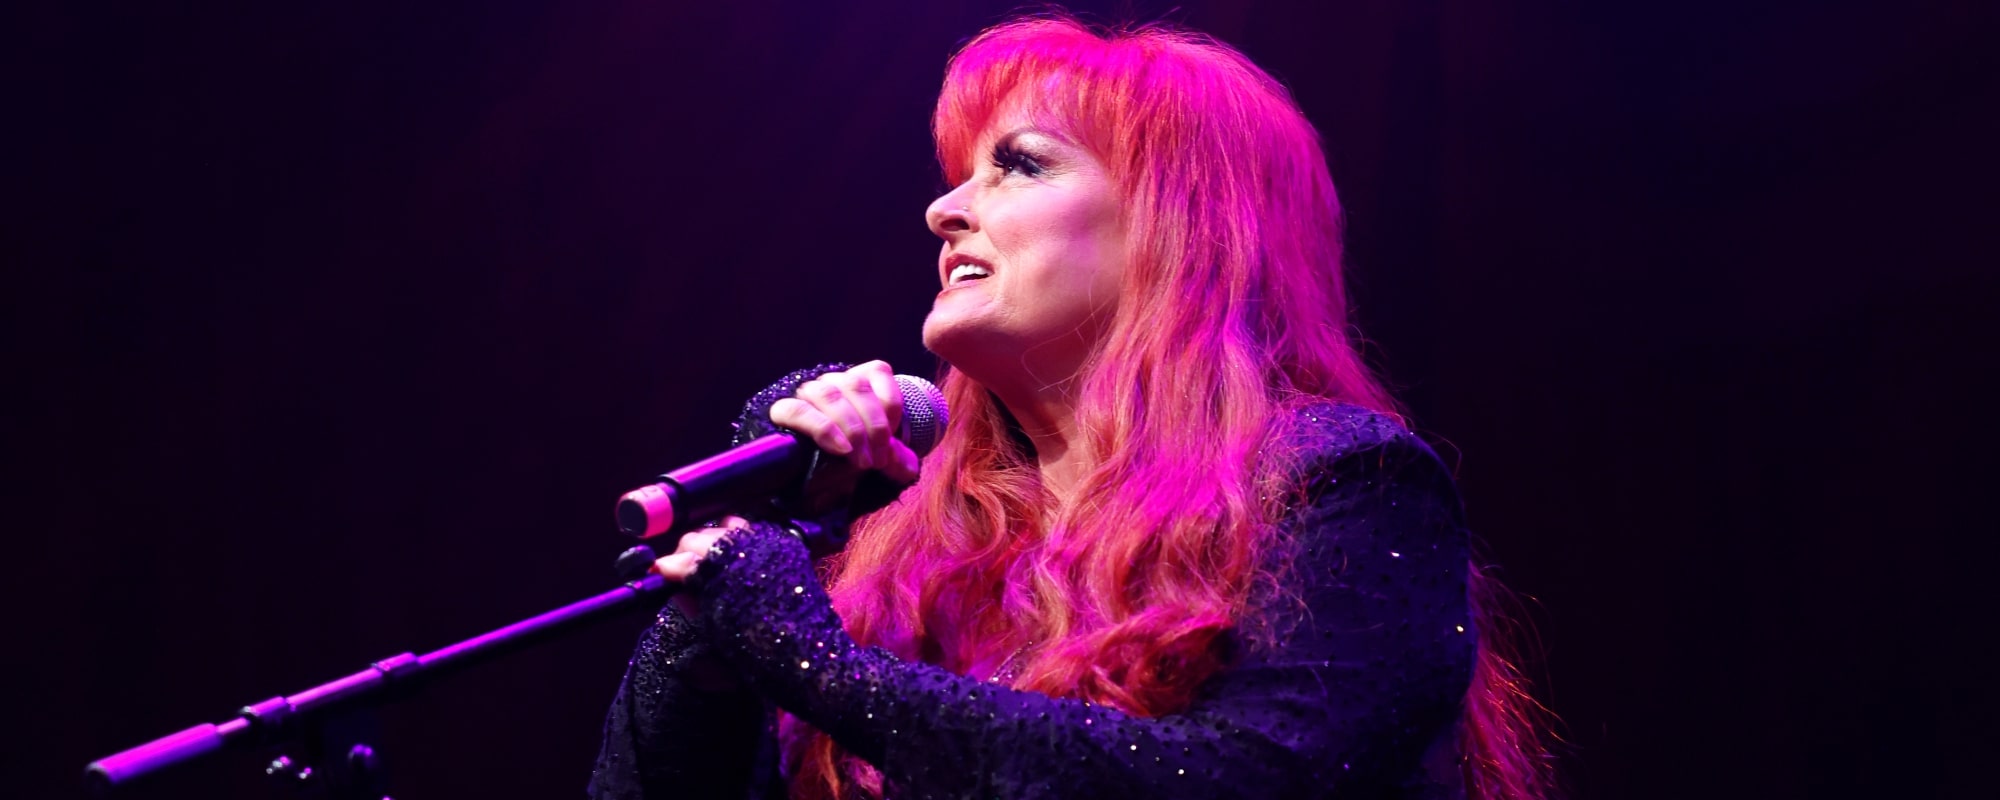 Watch: Wynonna Judd Delivers a Stunning Solo Rendition of “Beautiful Star of Bethlehem” During ‘Christmas at the Opry’